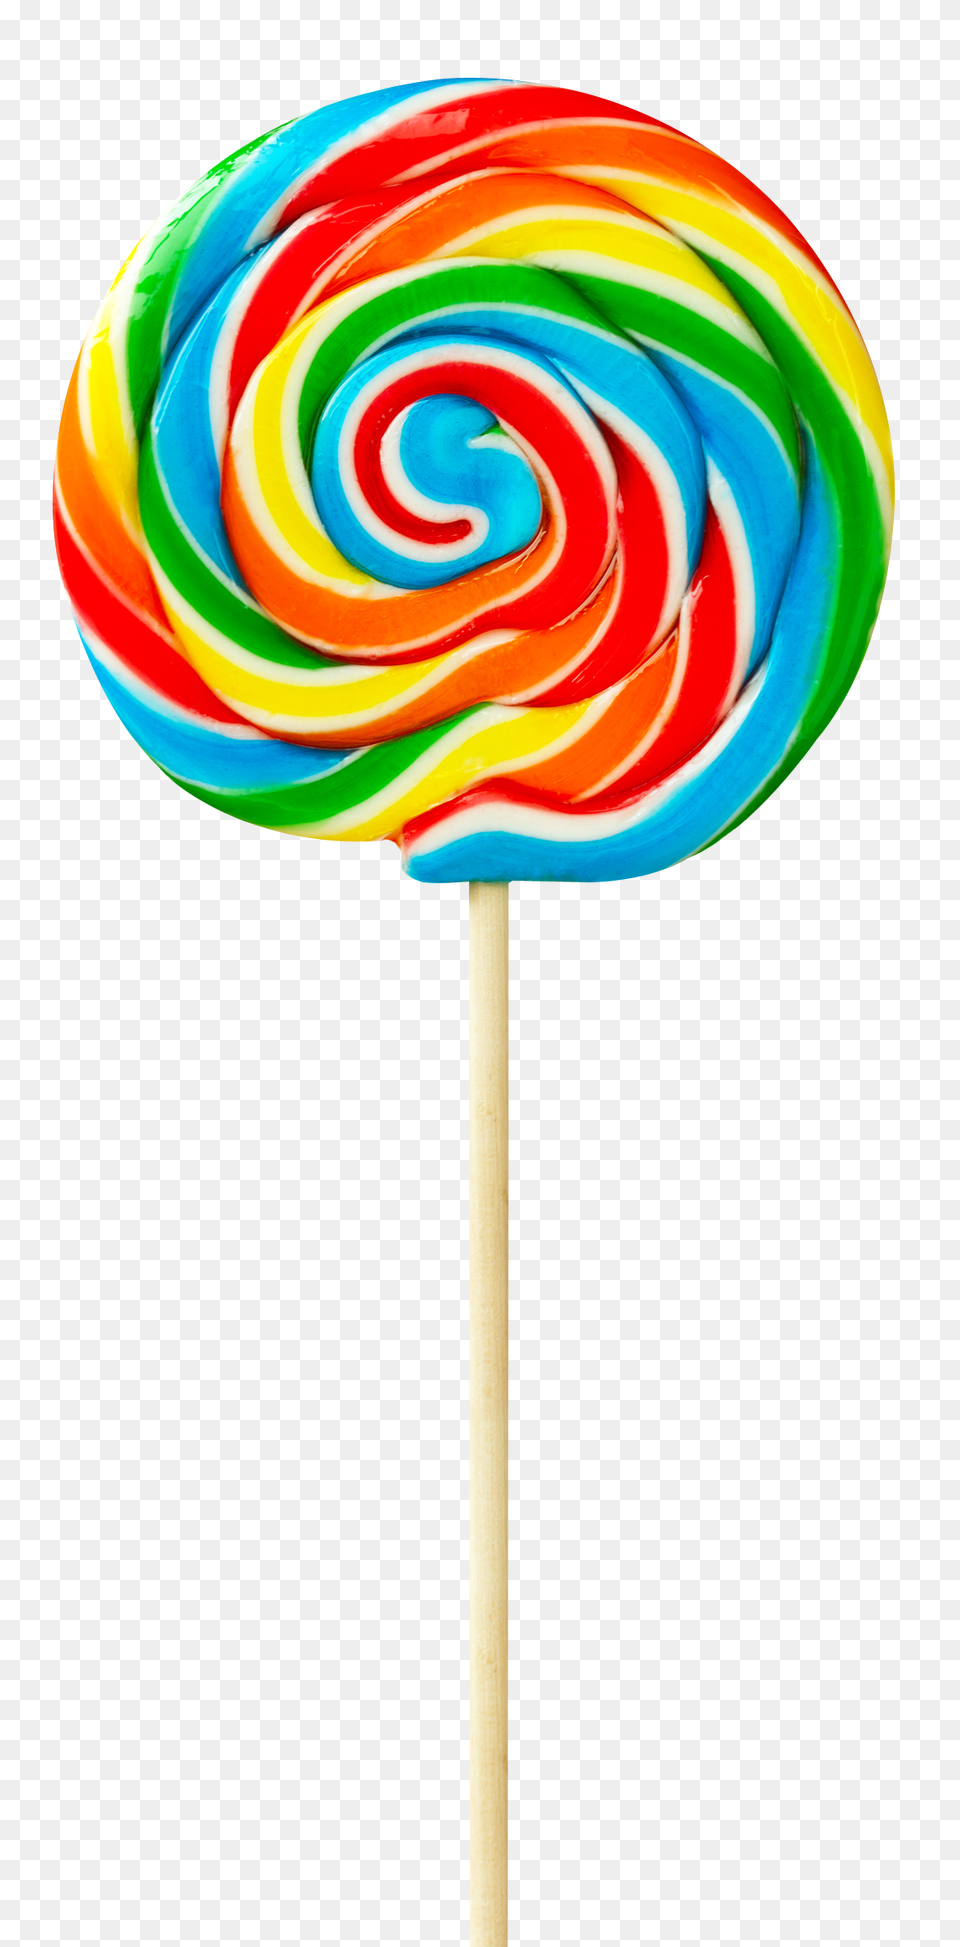 Colorful Lollipop Candy, Food, Sweets, Clothing Png Image